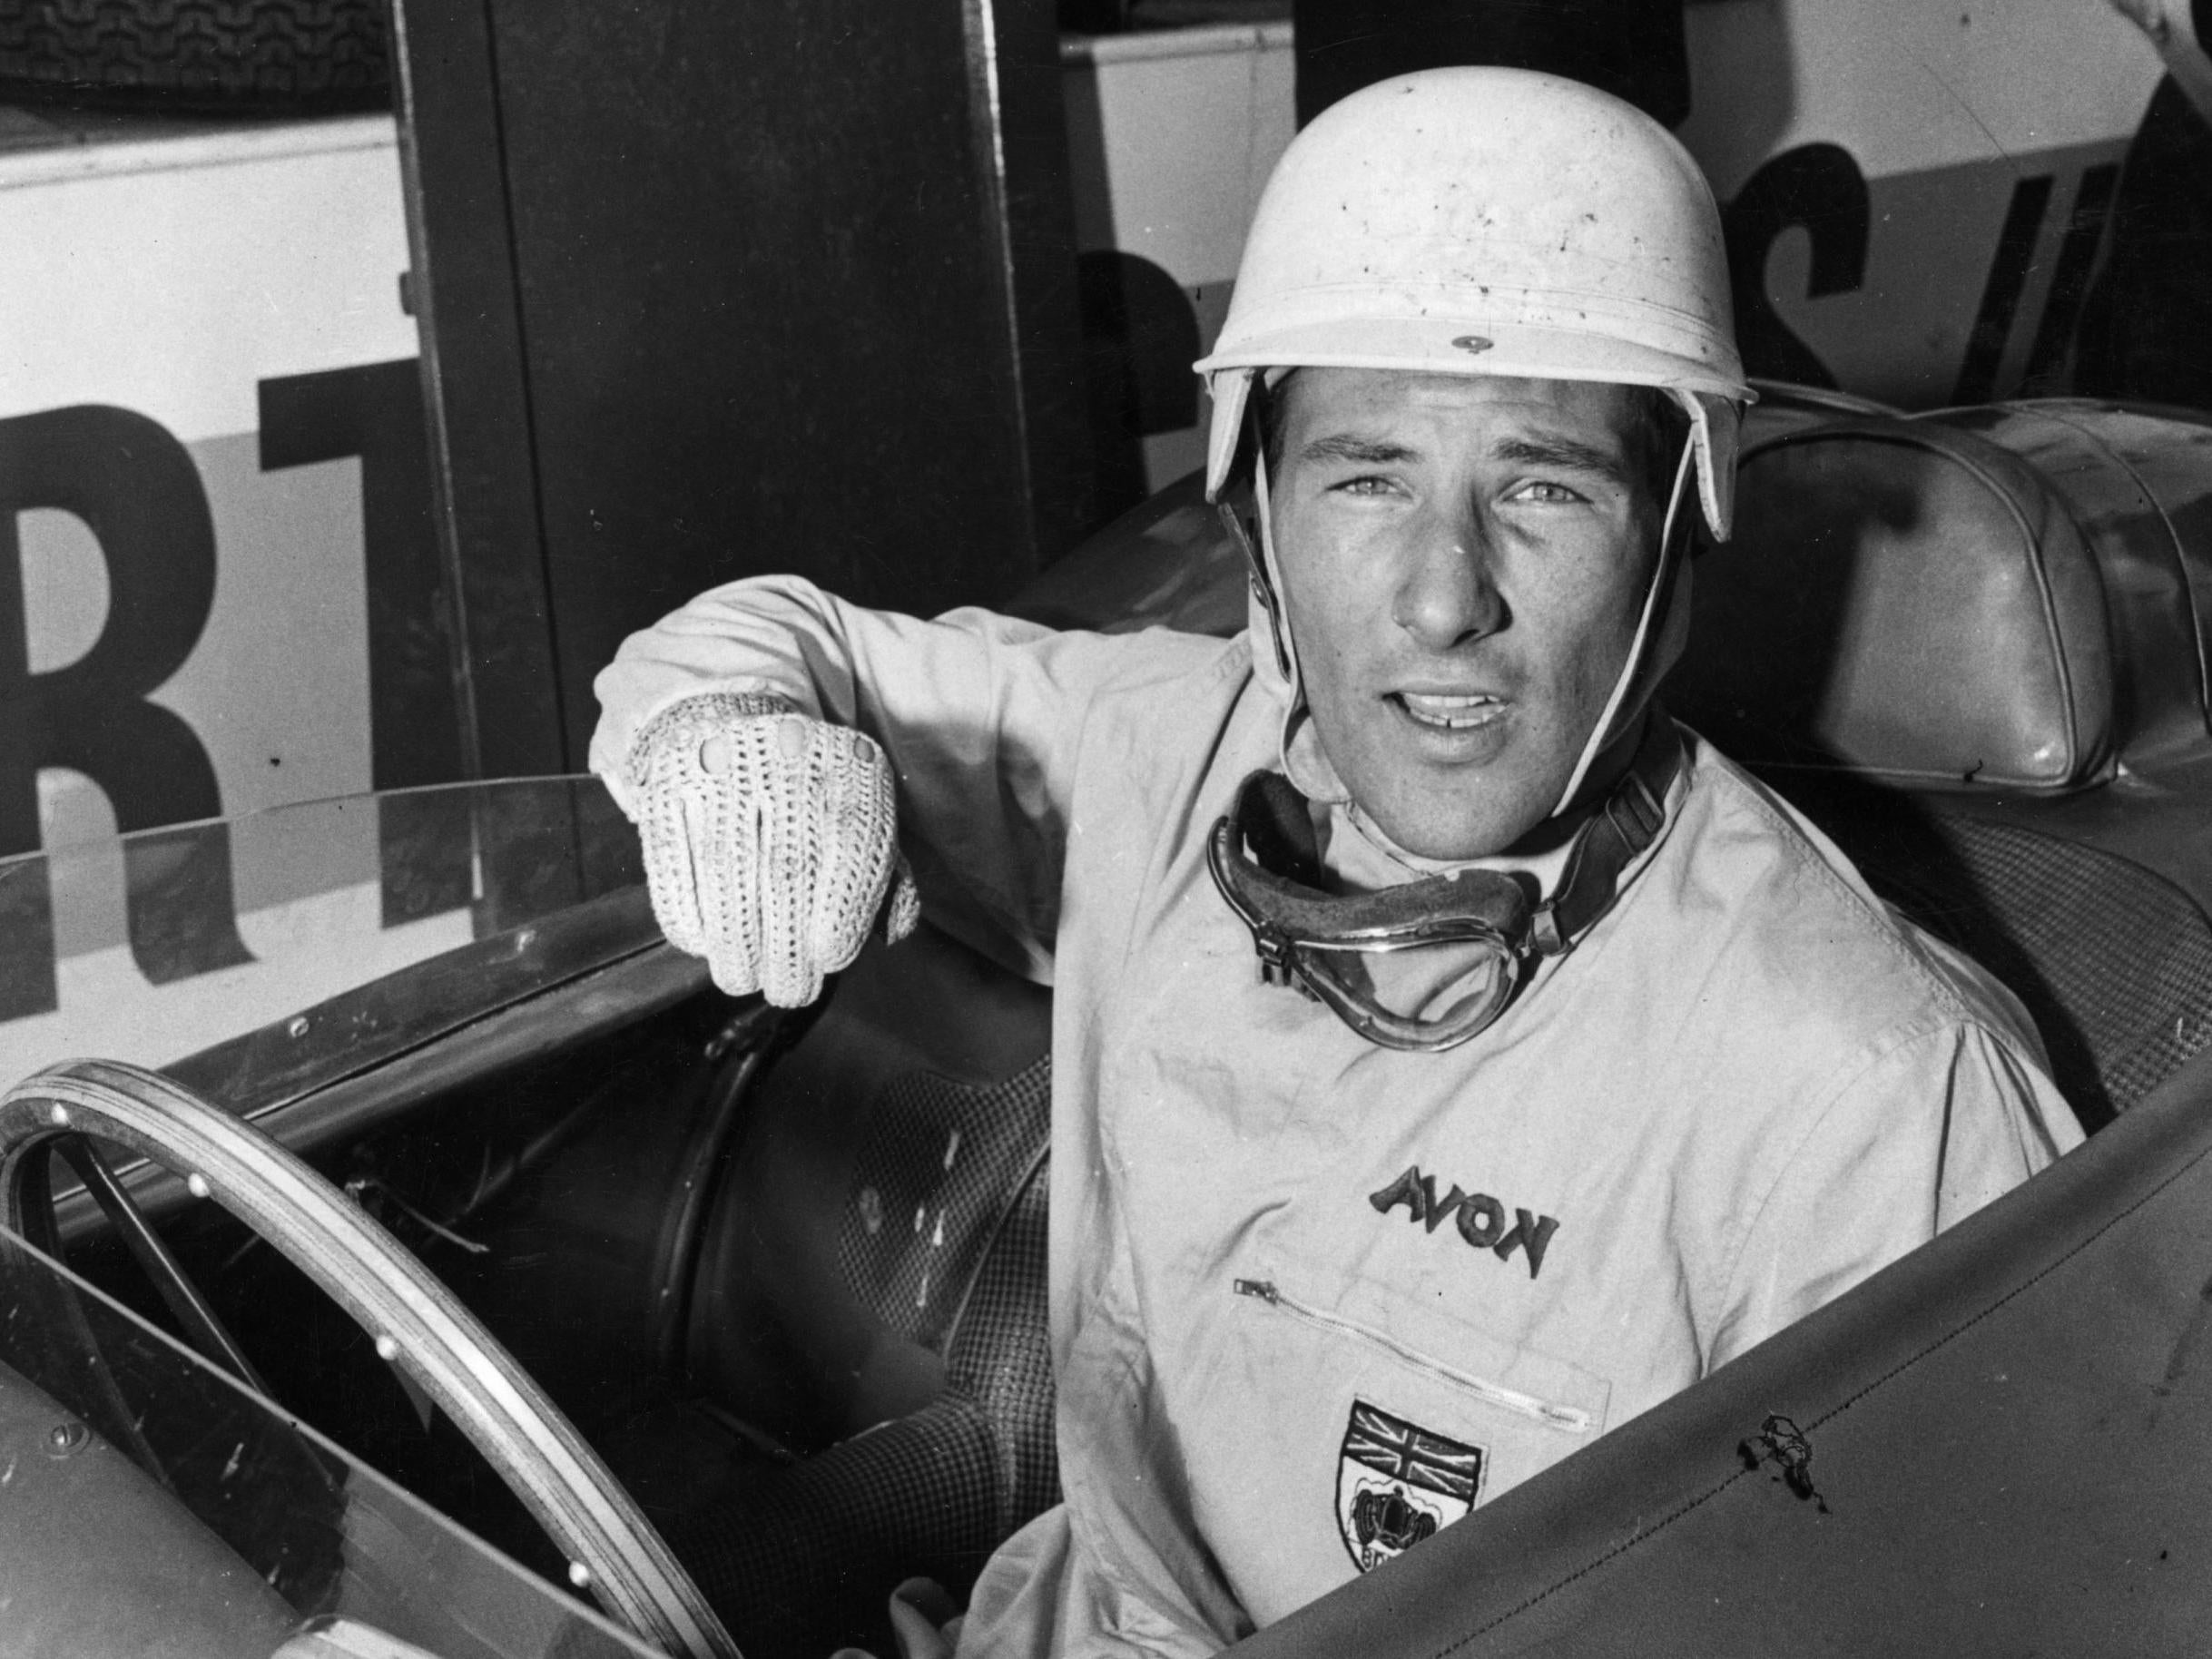 Sir Stirling in 1958: a superstar racer with style and swagger